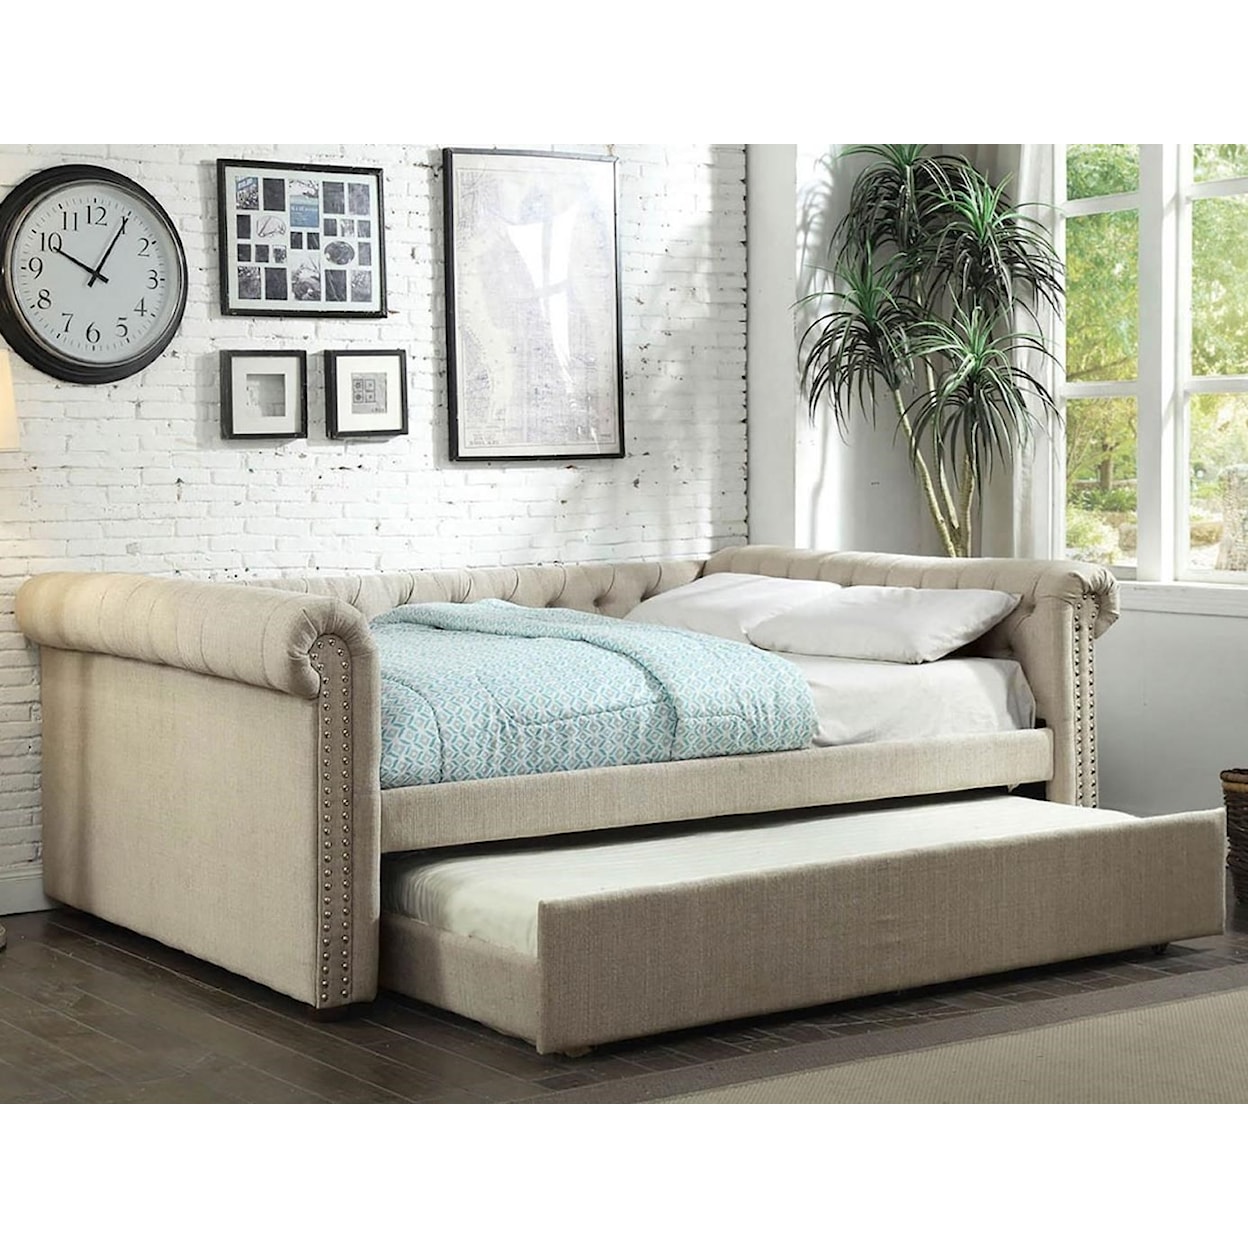 Furniture of America Leanna Queen Daybed w/ Trundle 